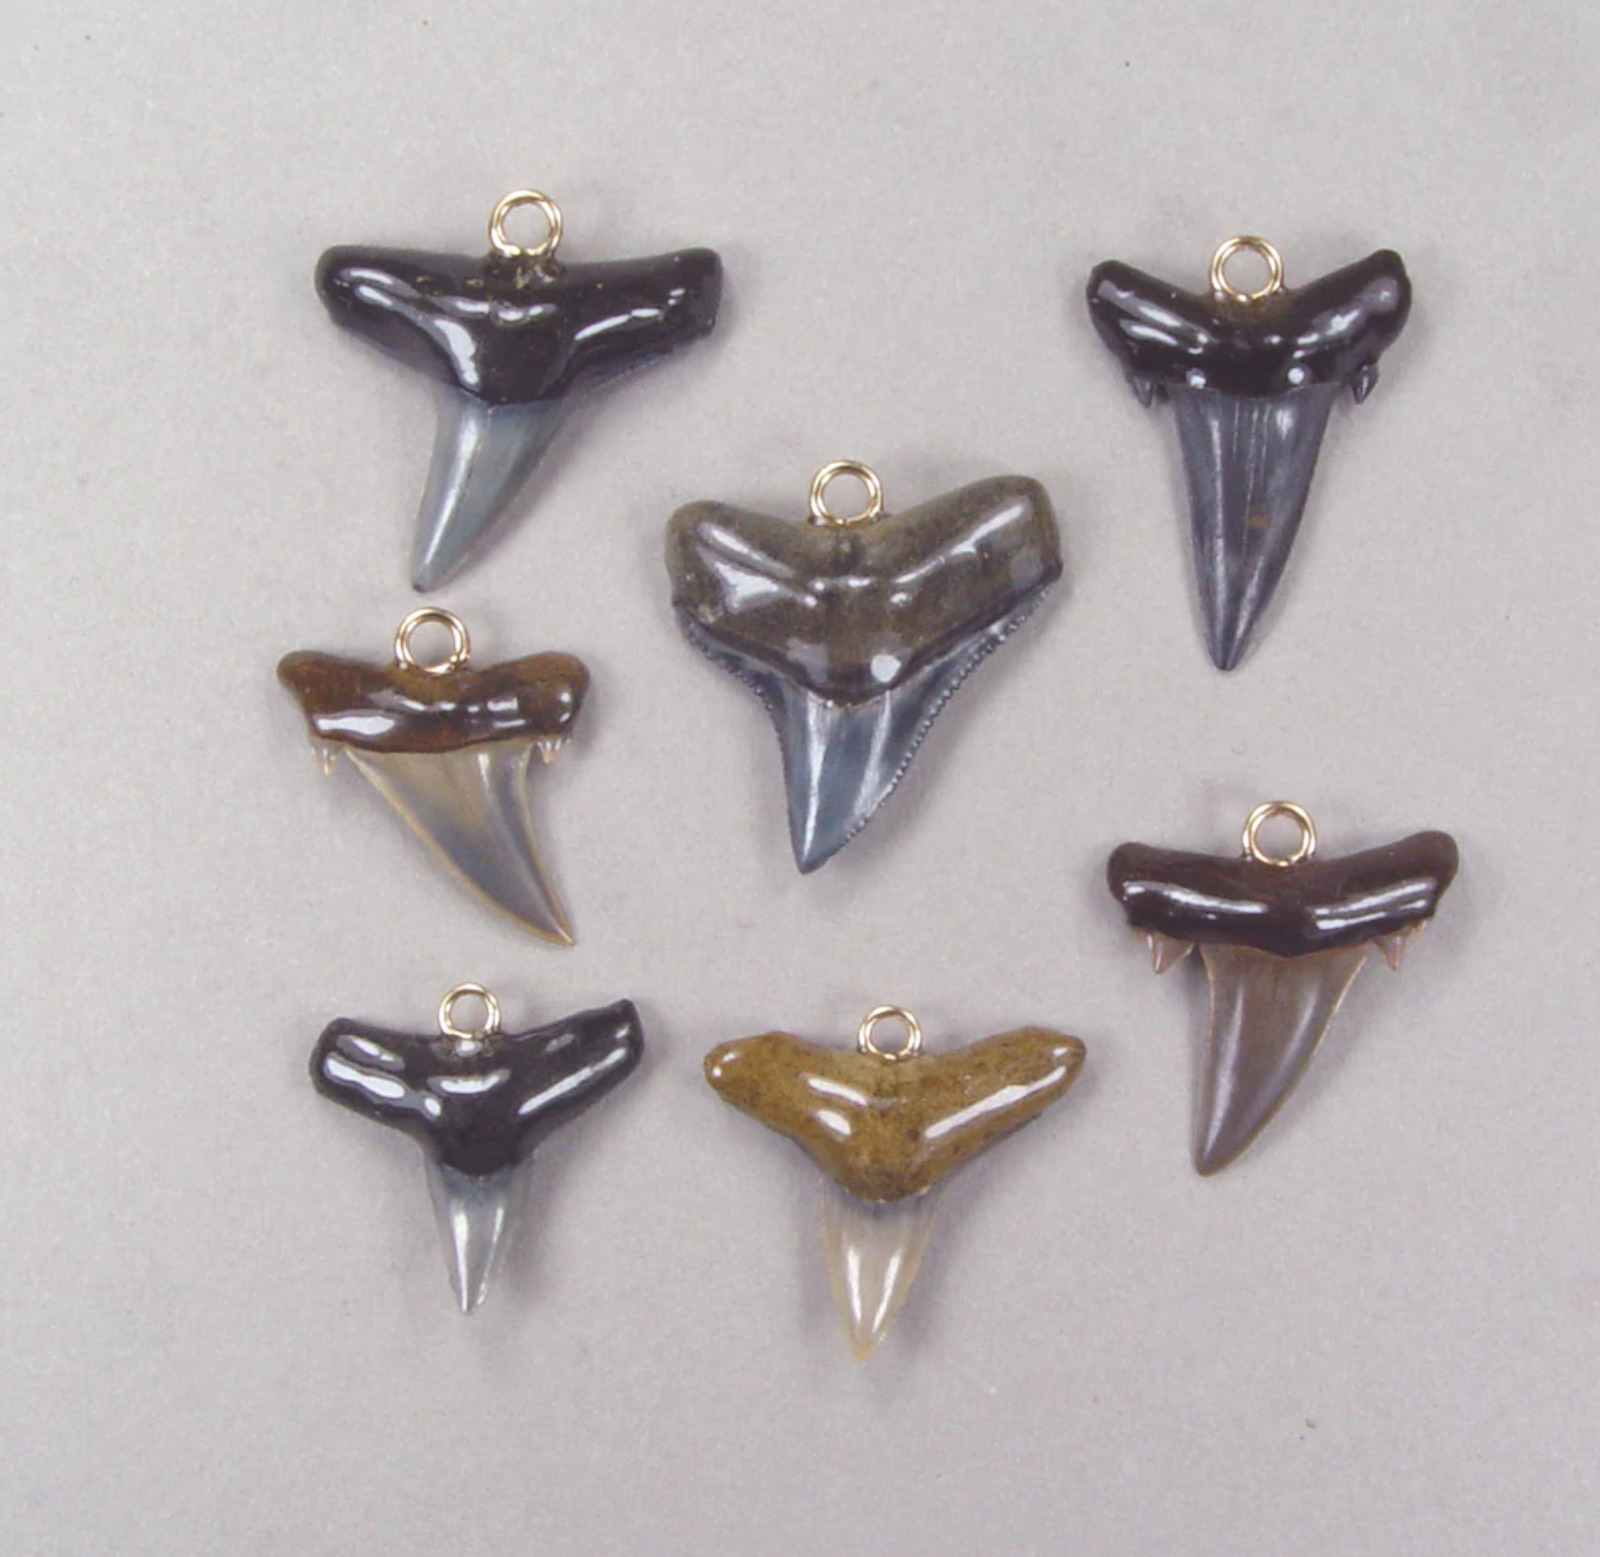 Bulk Lot of 10 Fossil Shark Tooth Pendants with Epoxy Resin Coated Roots